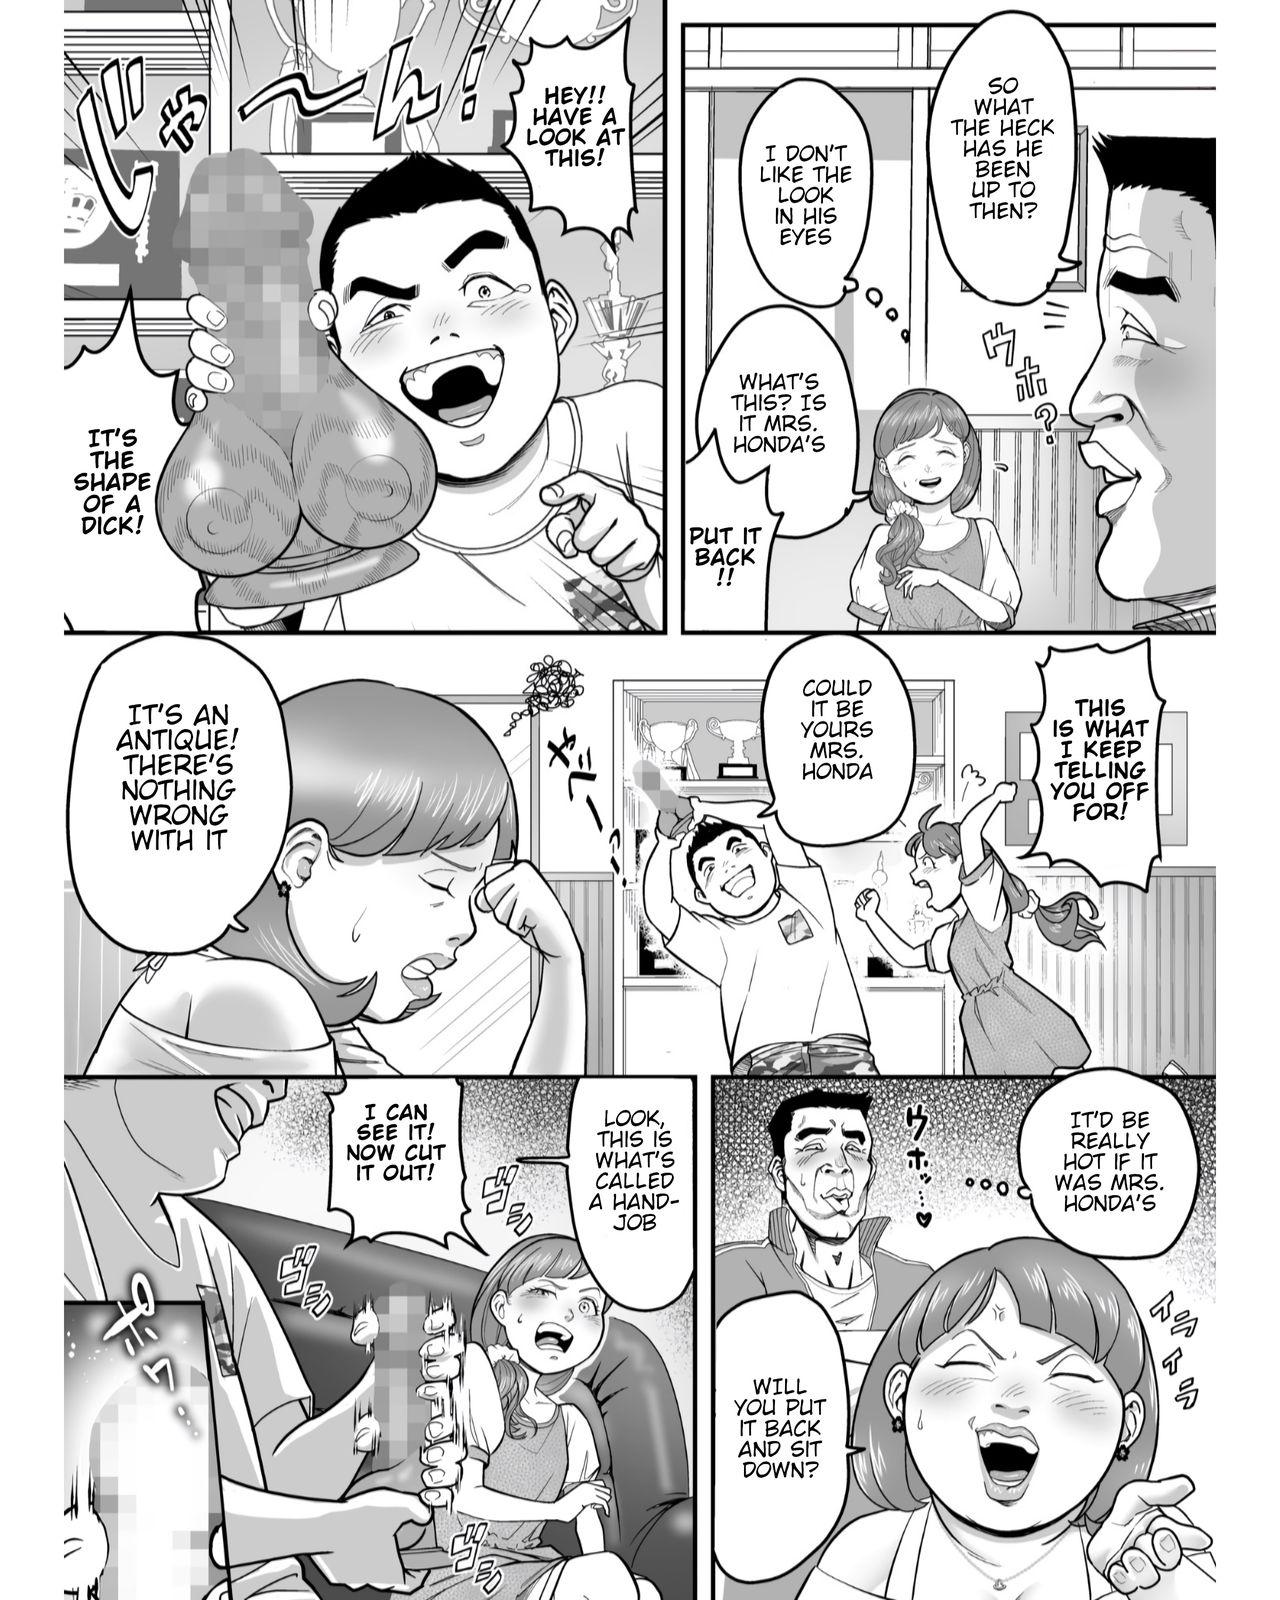 Defloration I've turned into that old hag Honda! - Original Pay - Page 4